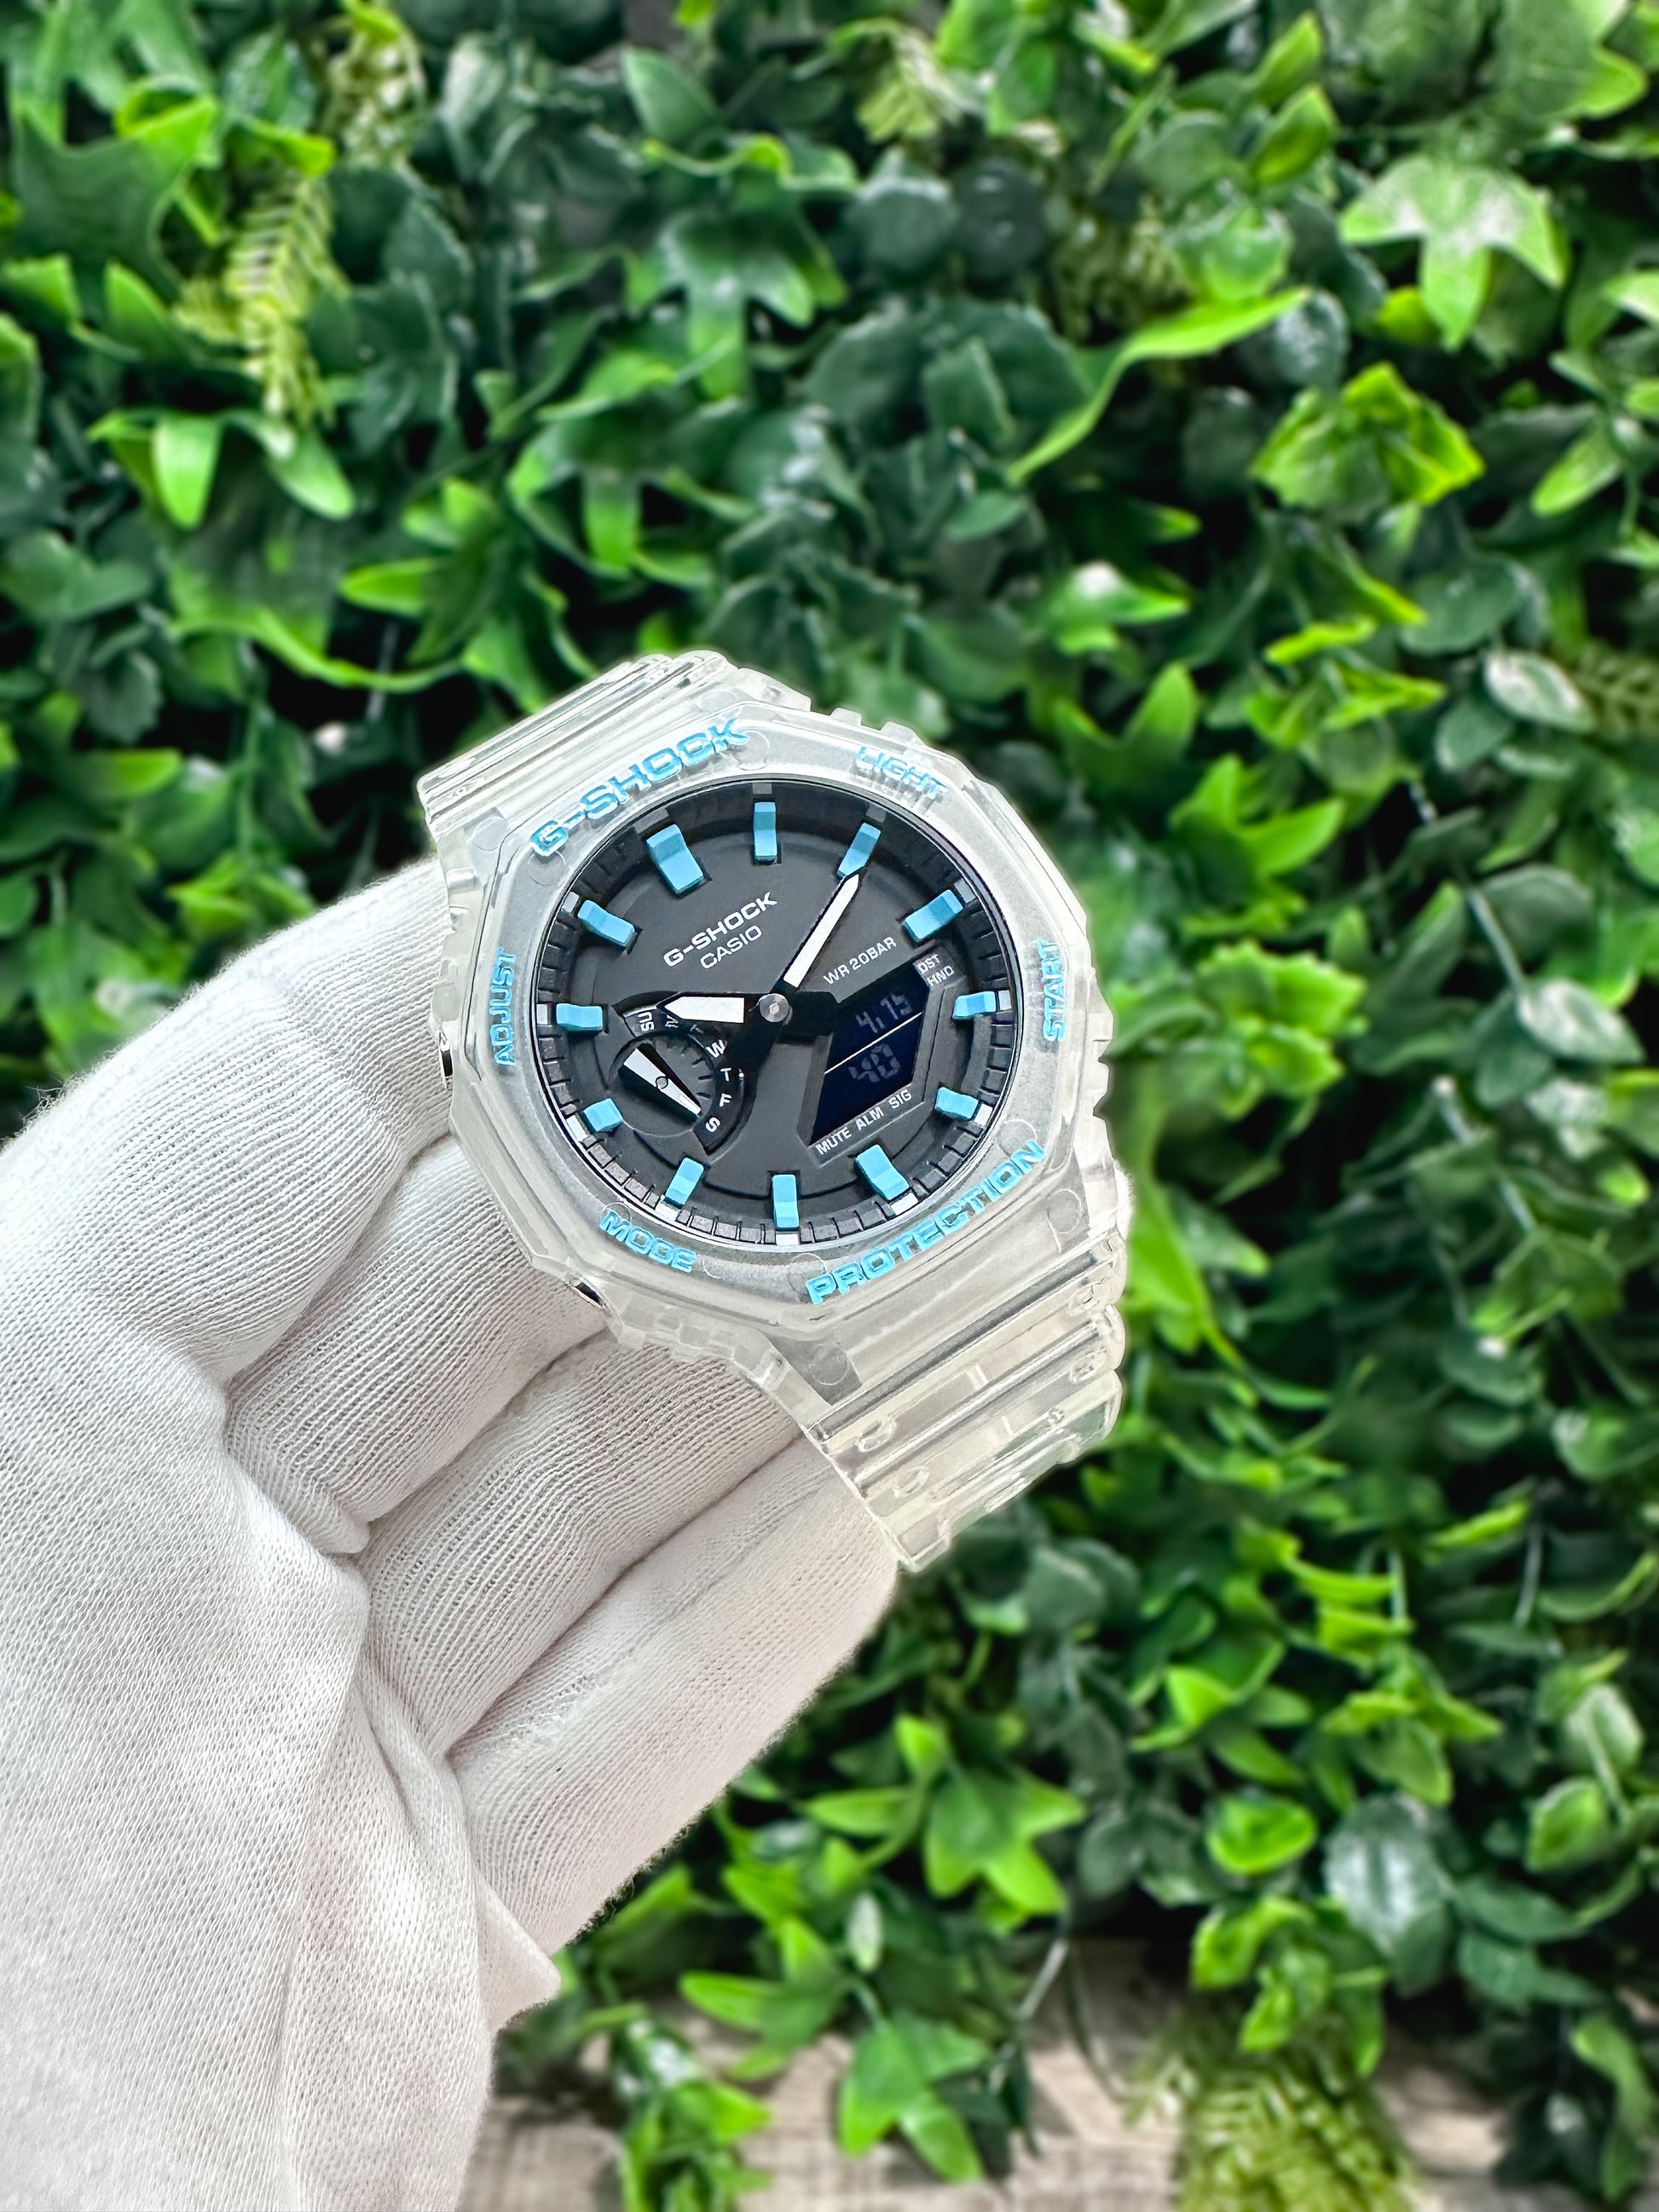 G-Shock CasiOak "Sky Blue Jelly" - Clear/Blue Hand Painted Genuine Casio GA2100 - Carbon Core Protection - Optional Sapphire Crystal